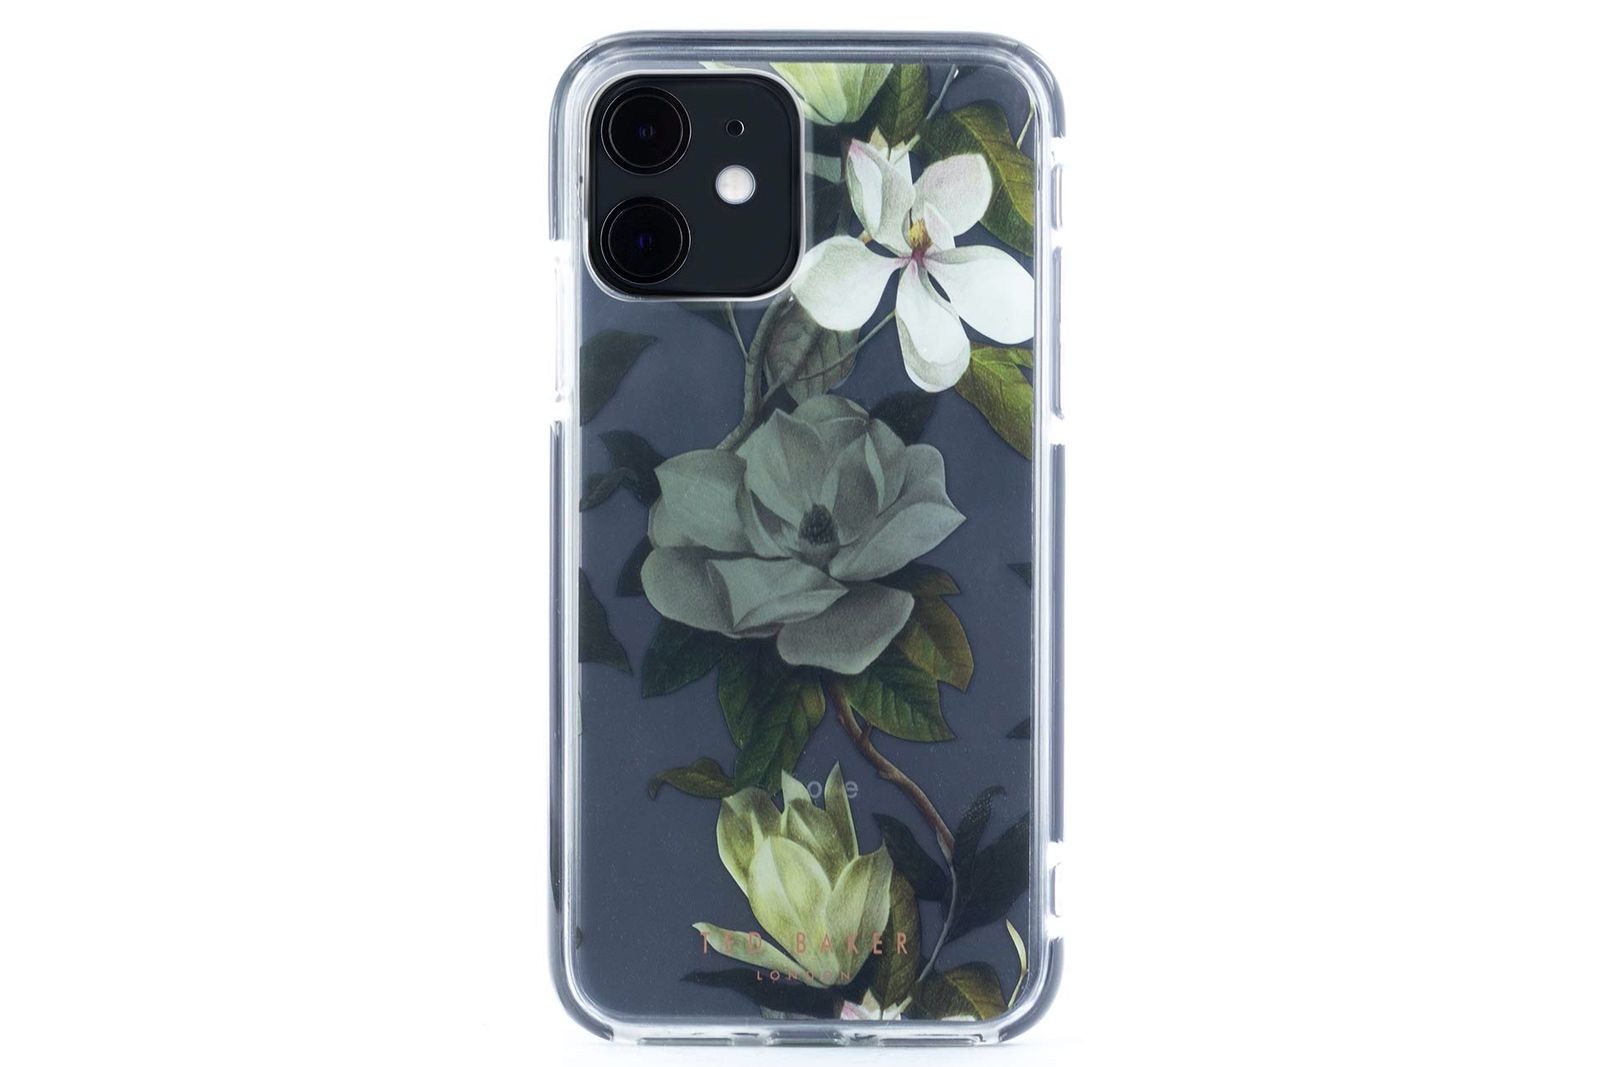 Best Iphone 11 11 Pro And 11 Pro Max Cases Protect Your New Apple Device image 1